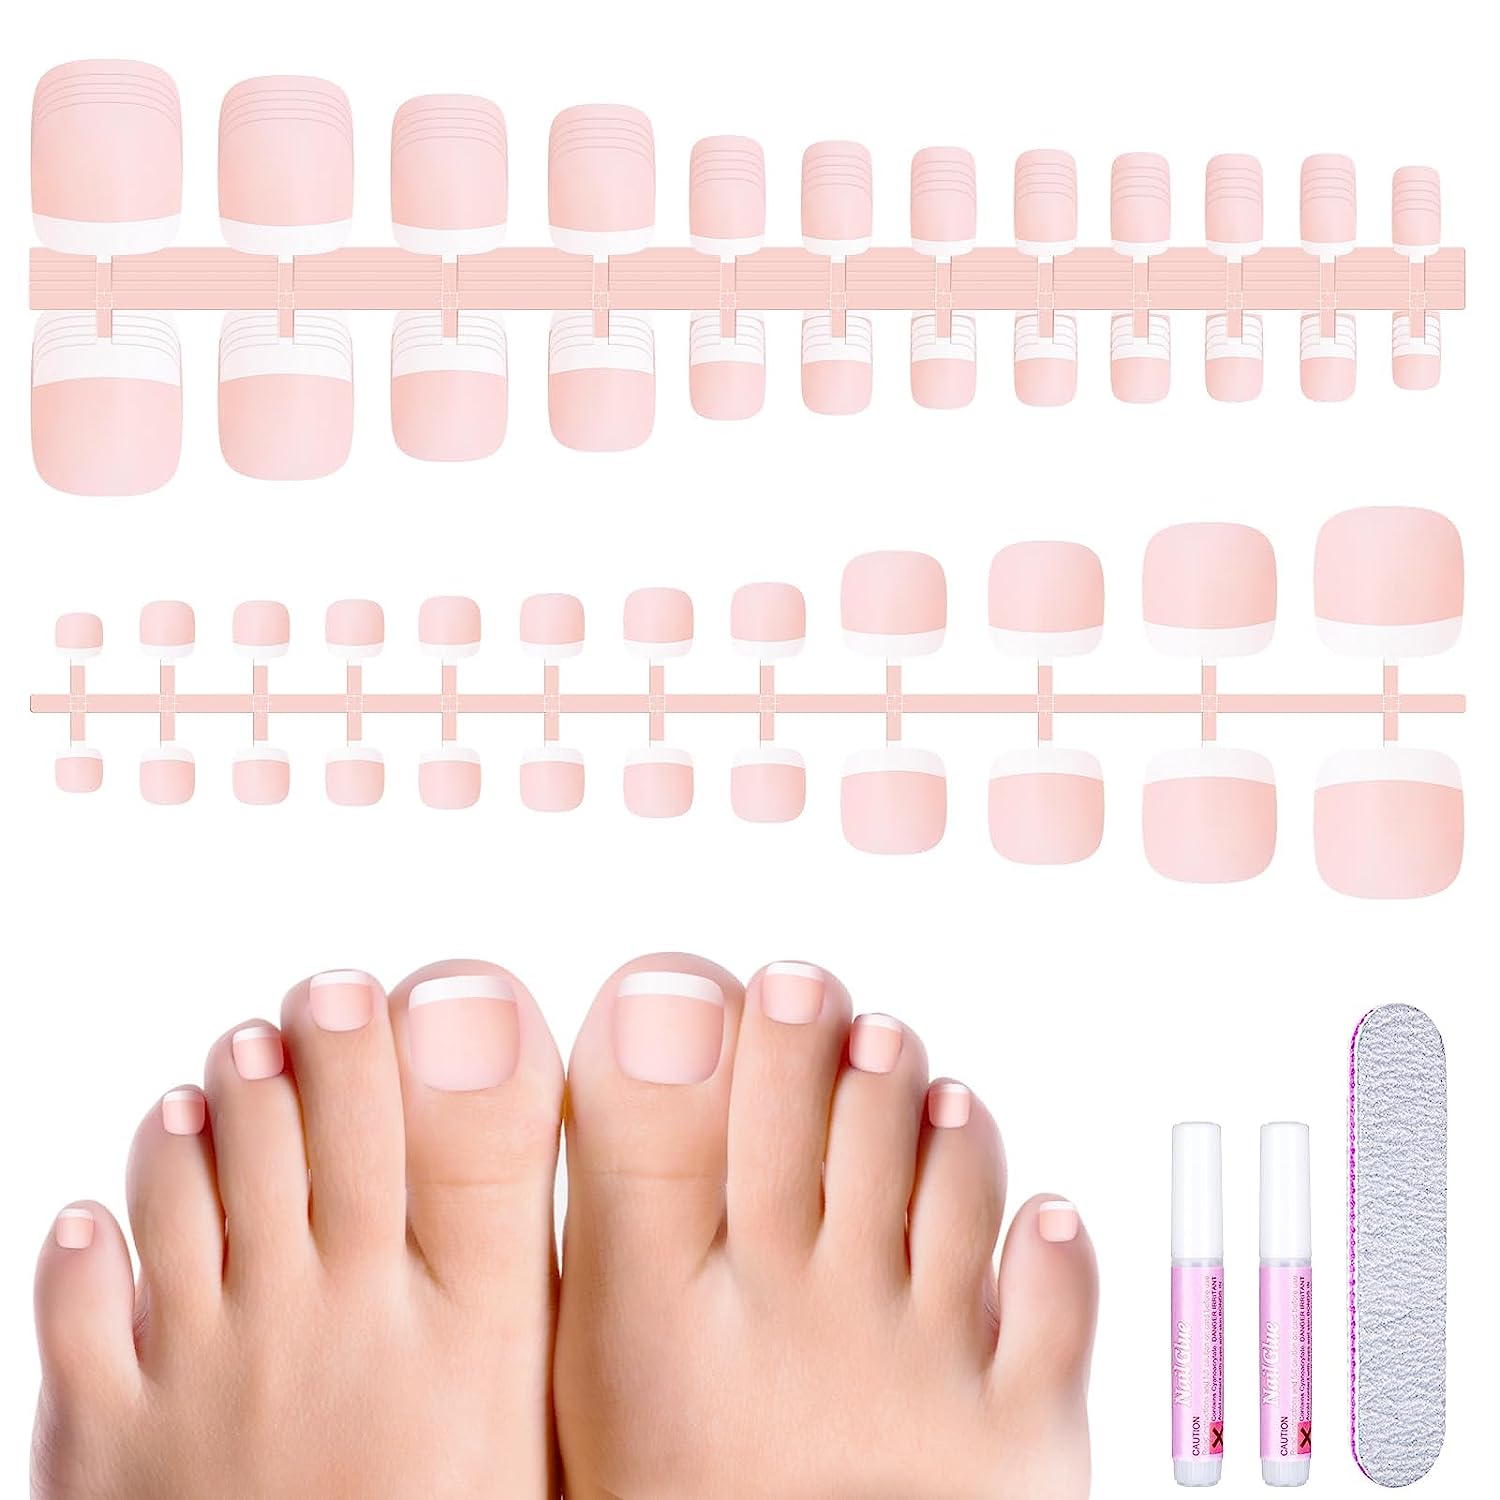 Melliex 8 Pieces French False toe Nails with Glue, Full Coverage, Short False Toe Nails, Artificial Acrylic Toe Nails With Nail Files, Stick Toenails for Women Nails